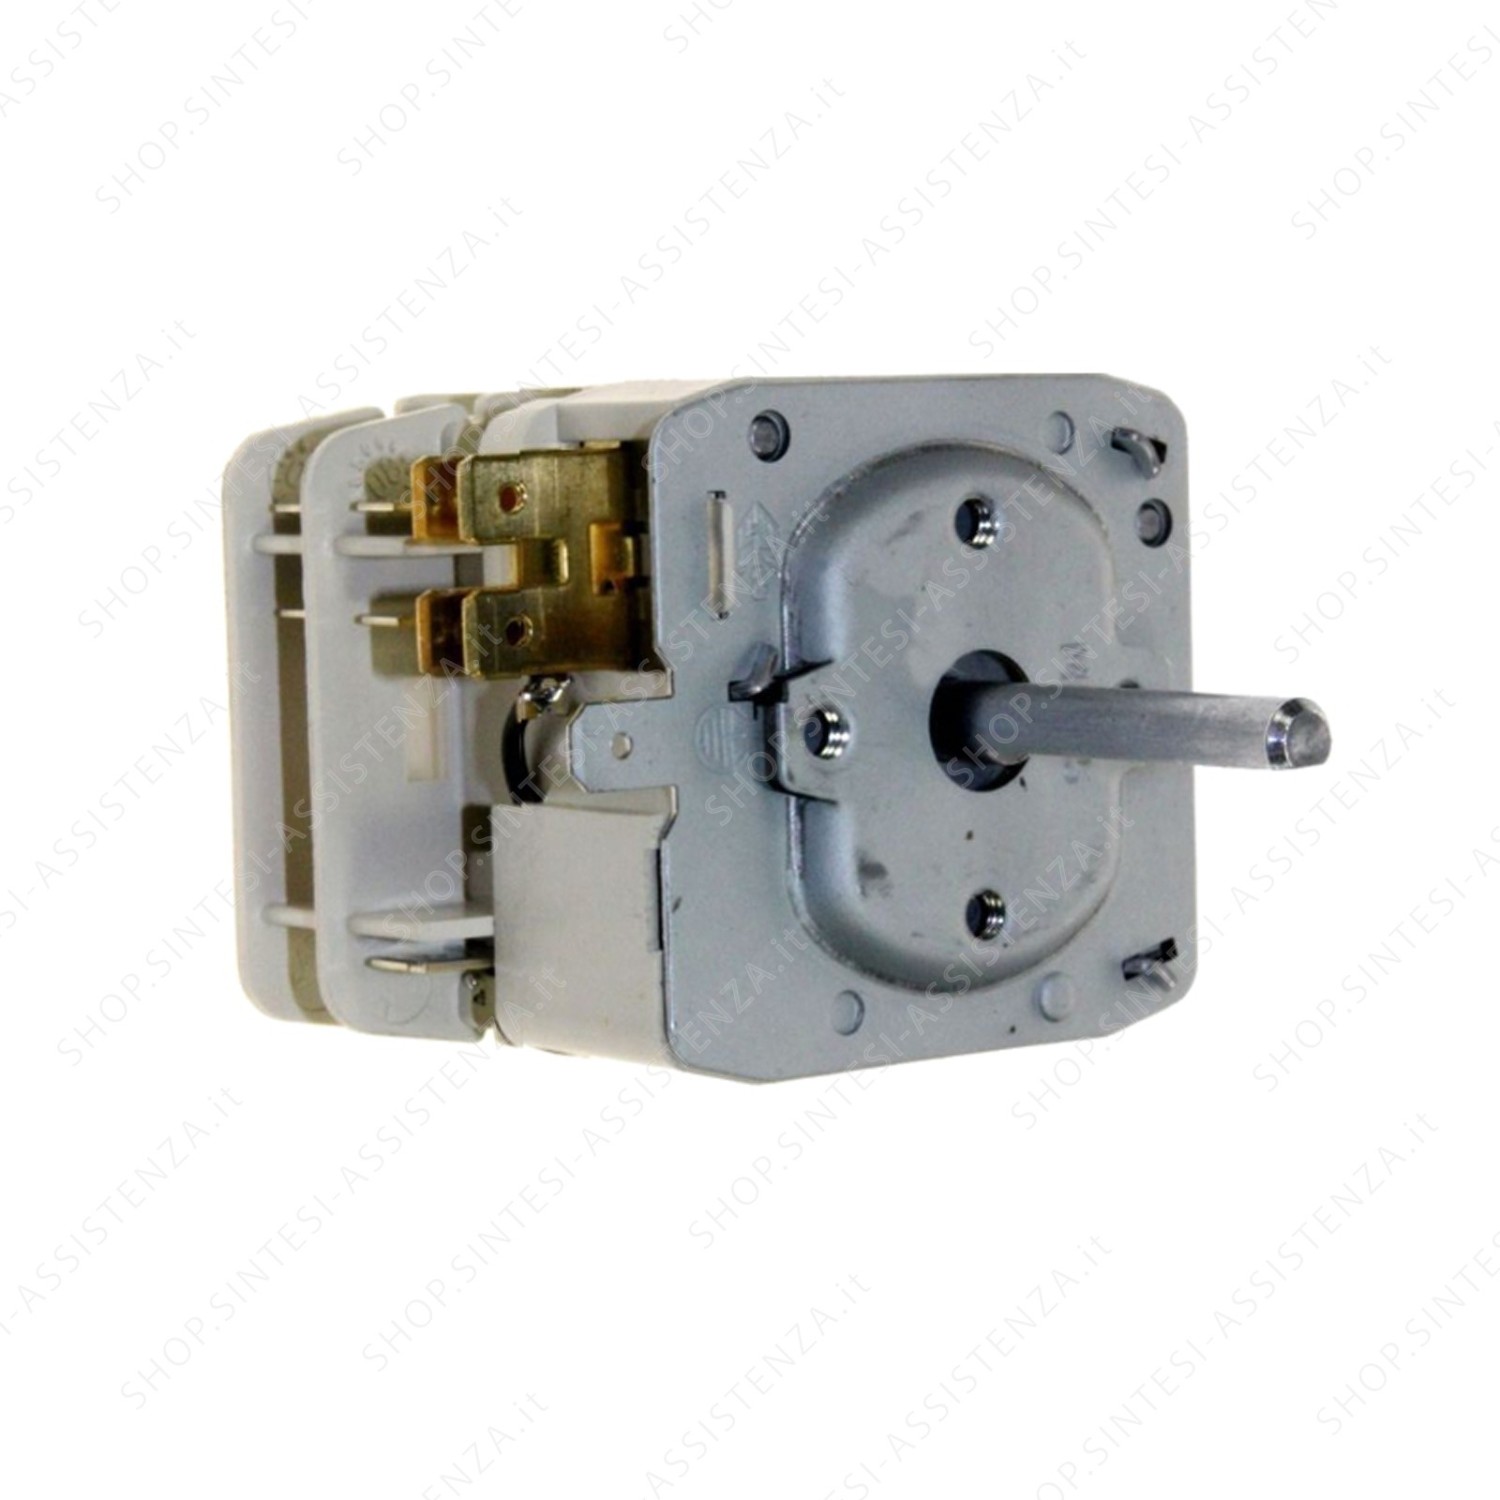 1 HOUR ELECTRONIC TIMER FOR ALFA BRIOCHES OVEN - 818800079